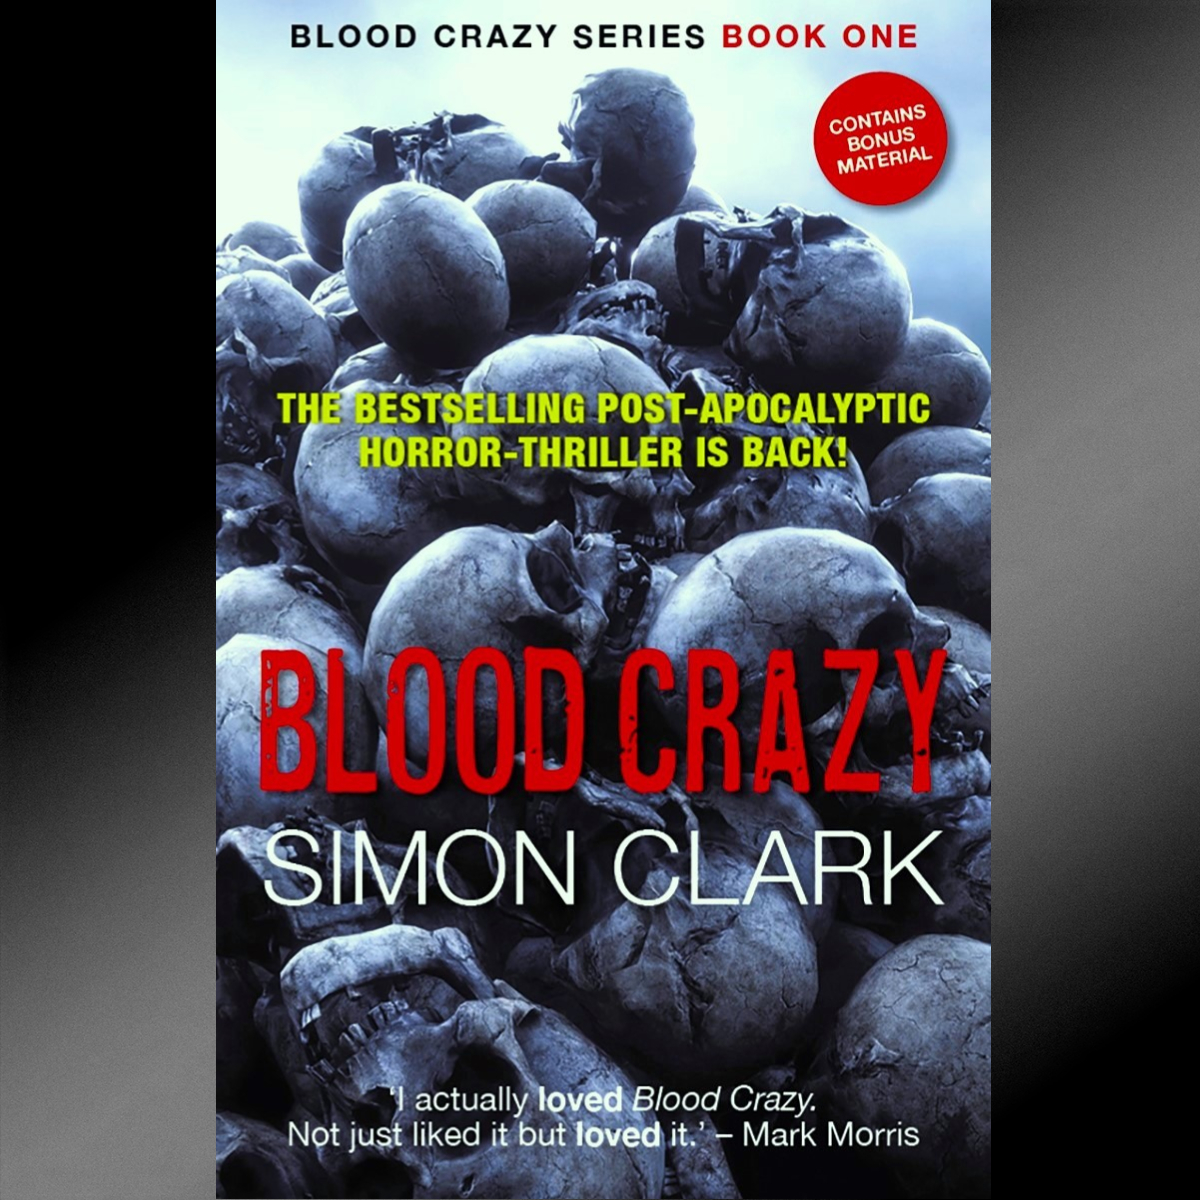 Blood Crazy 1 and 2 available now. “Blood Crazy by Simon Clark remains, in my opinion, one of the best horror novels of the 2000s.” Brian Keene